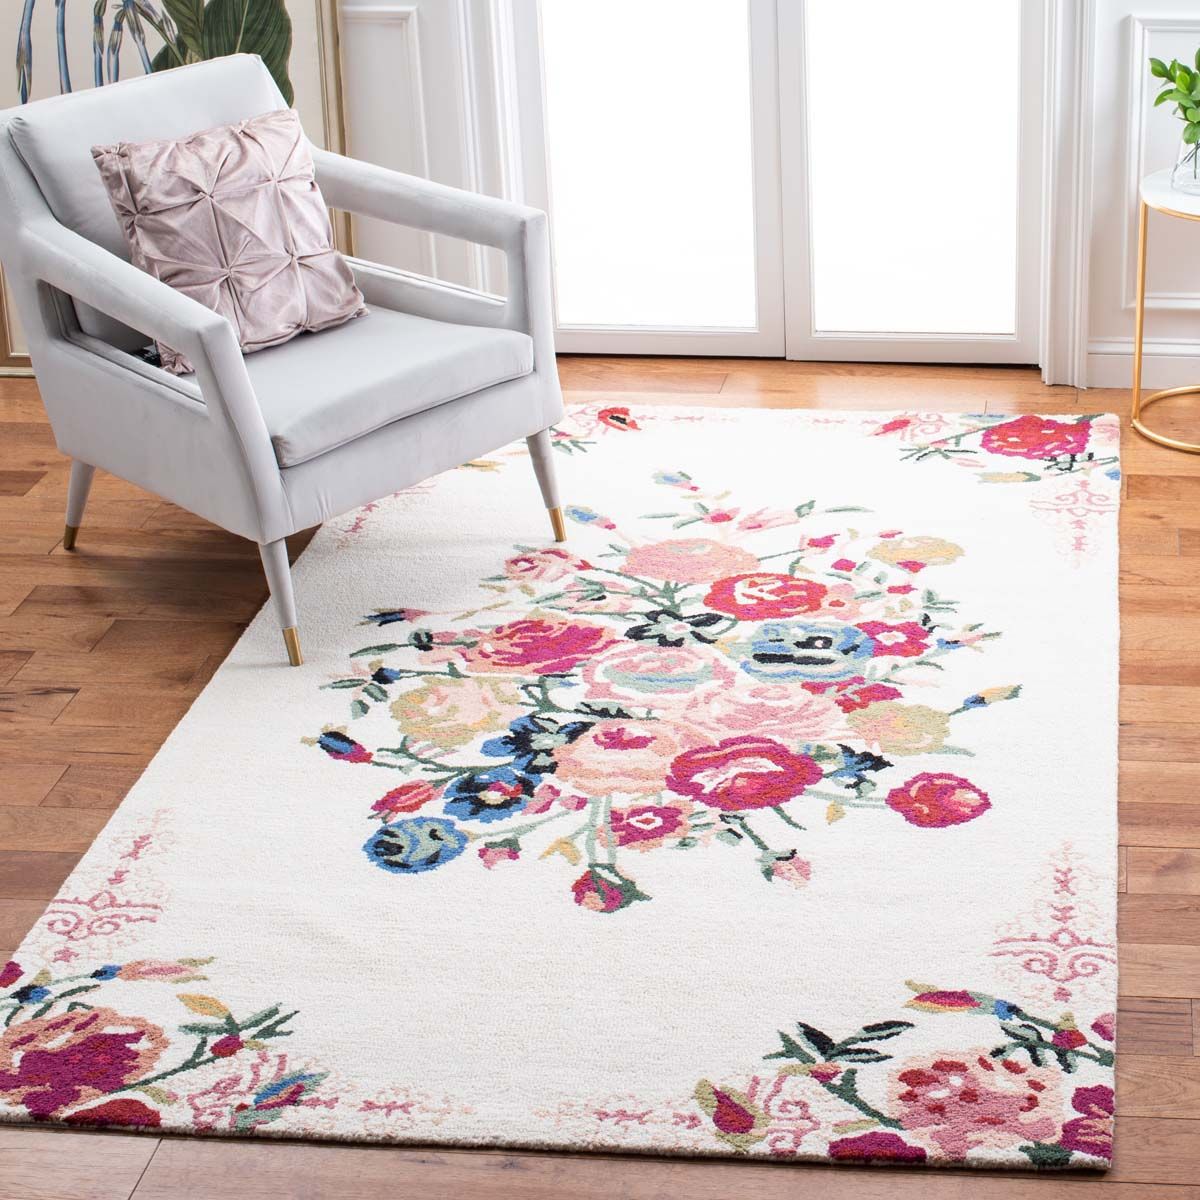 Safavieh Blossom Rug Collection: Blm575u – Pink / Ivory With Ivory Blossom Oval Rugs (View 2 of 15)